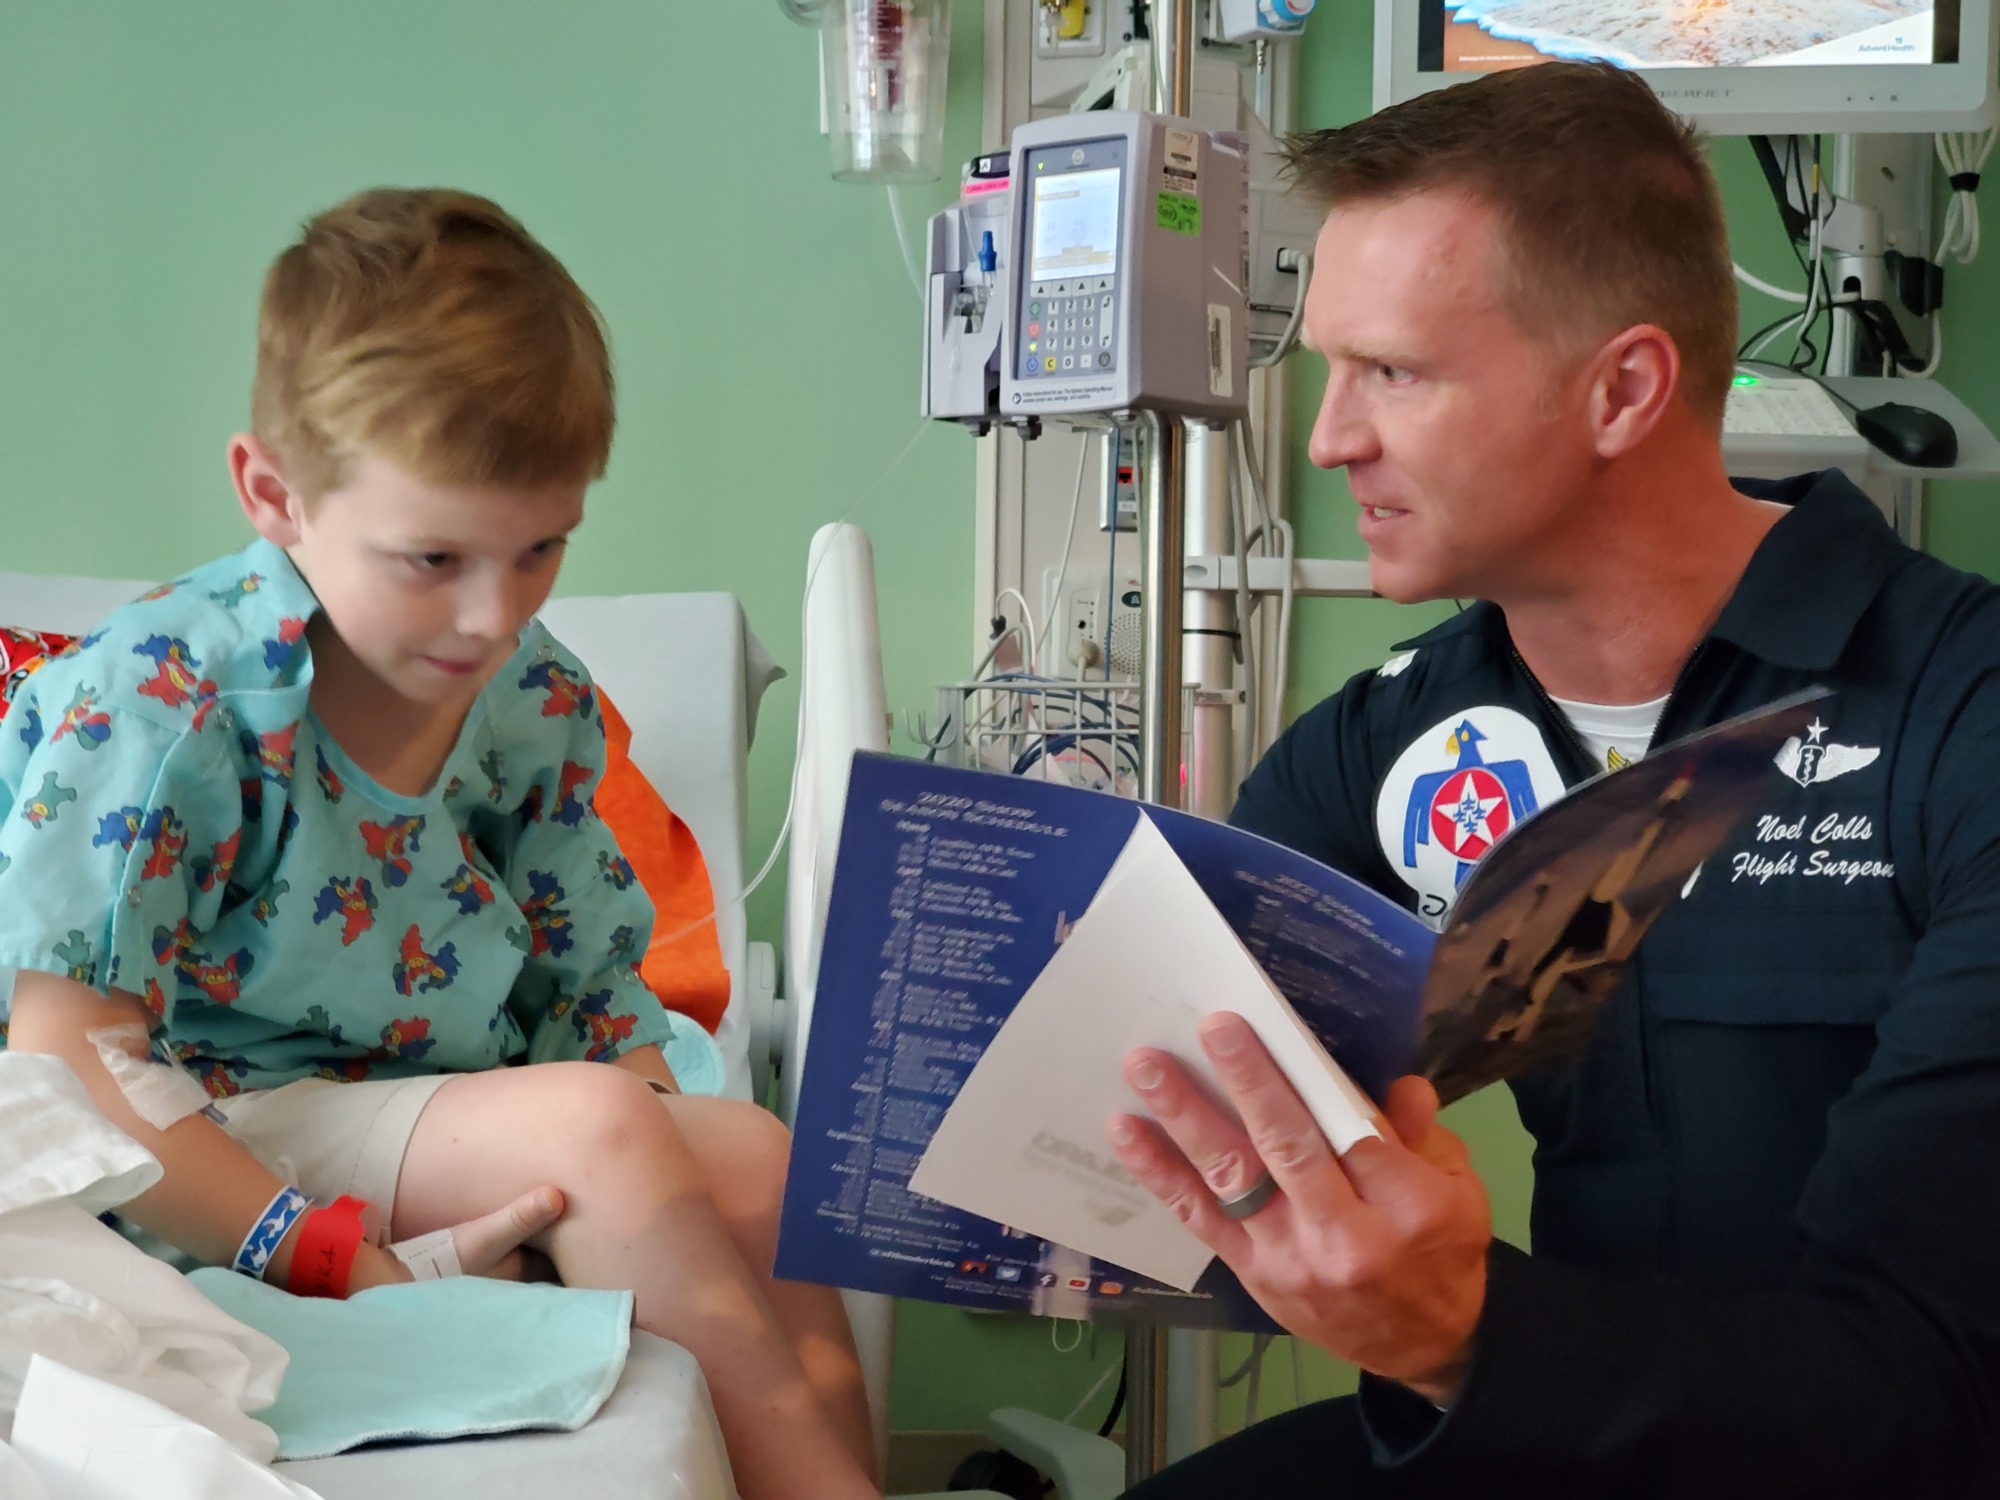 Lt. Col. Dr. Noel Colls, flight surgeon, talks to Alexander Arnold, 6, of Bunnell during a visit by the U.S. Air Force Thunderbirds to the AdventHealth Daytona Beach pediatric unit. Courtesy photo